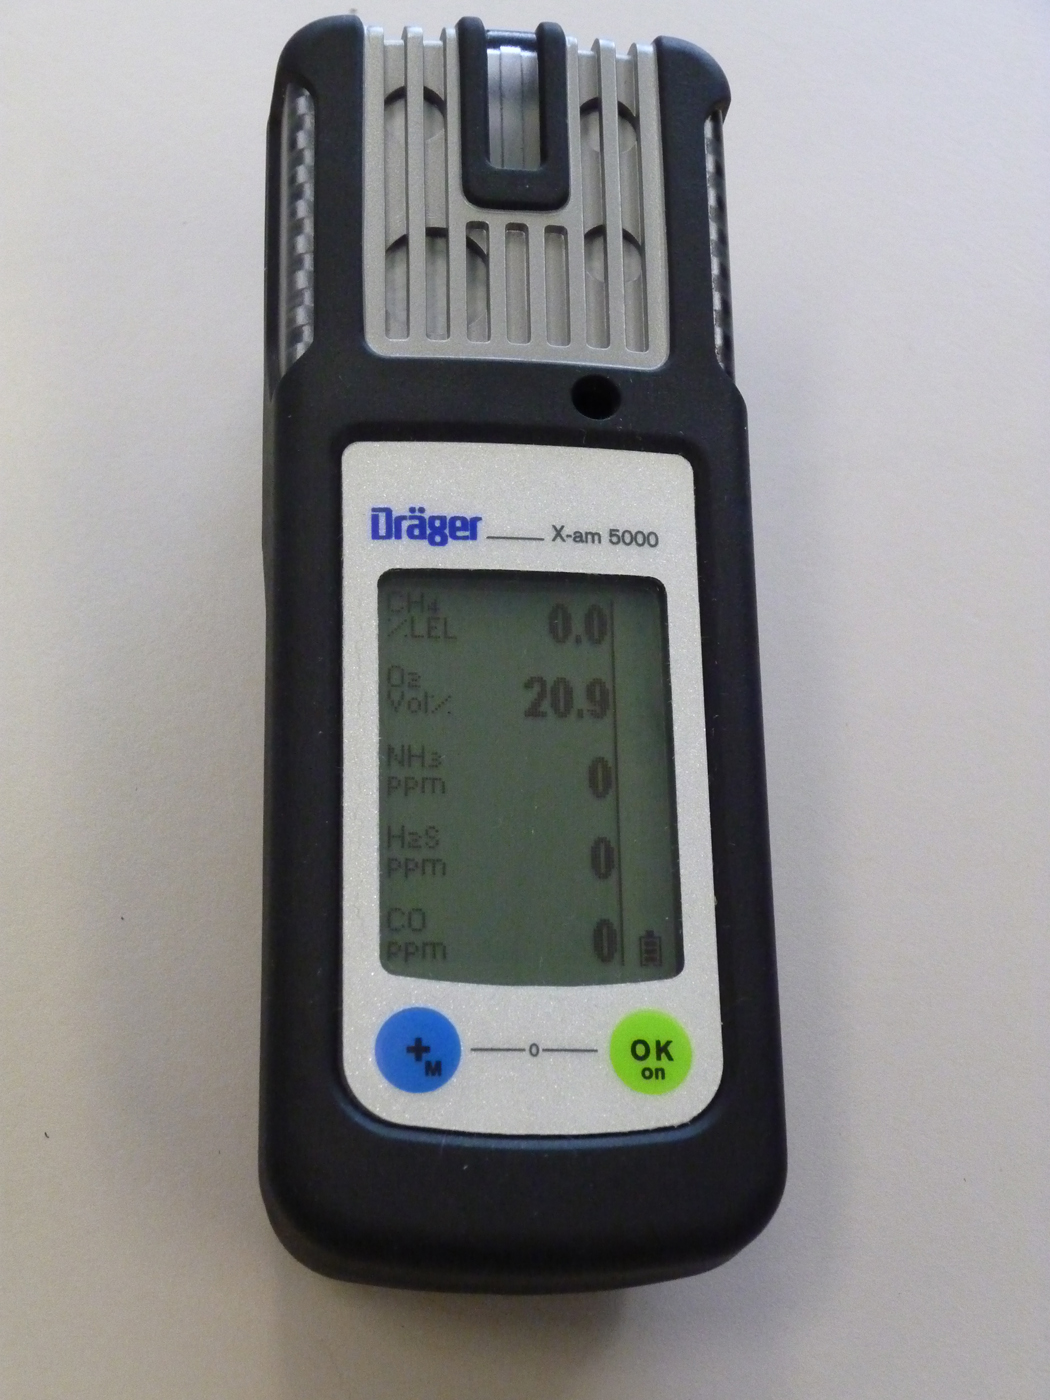 A personal hazardous gas monitor that triggers and audible and visual alarm when acceptable concentration of a gas goes beyond a safe threshold.